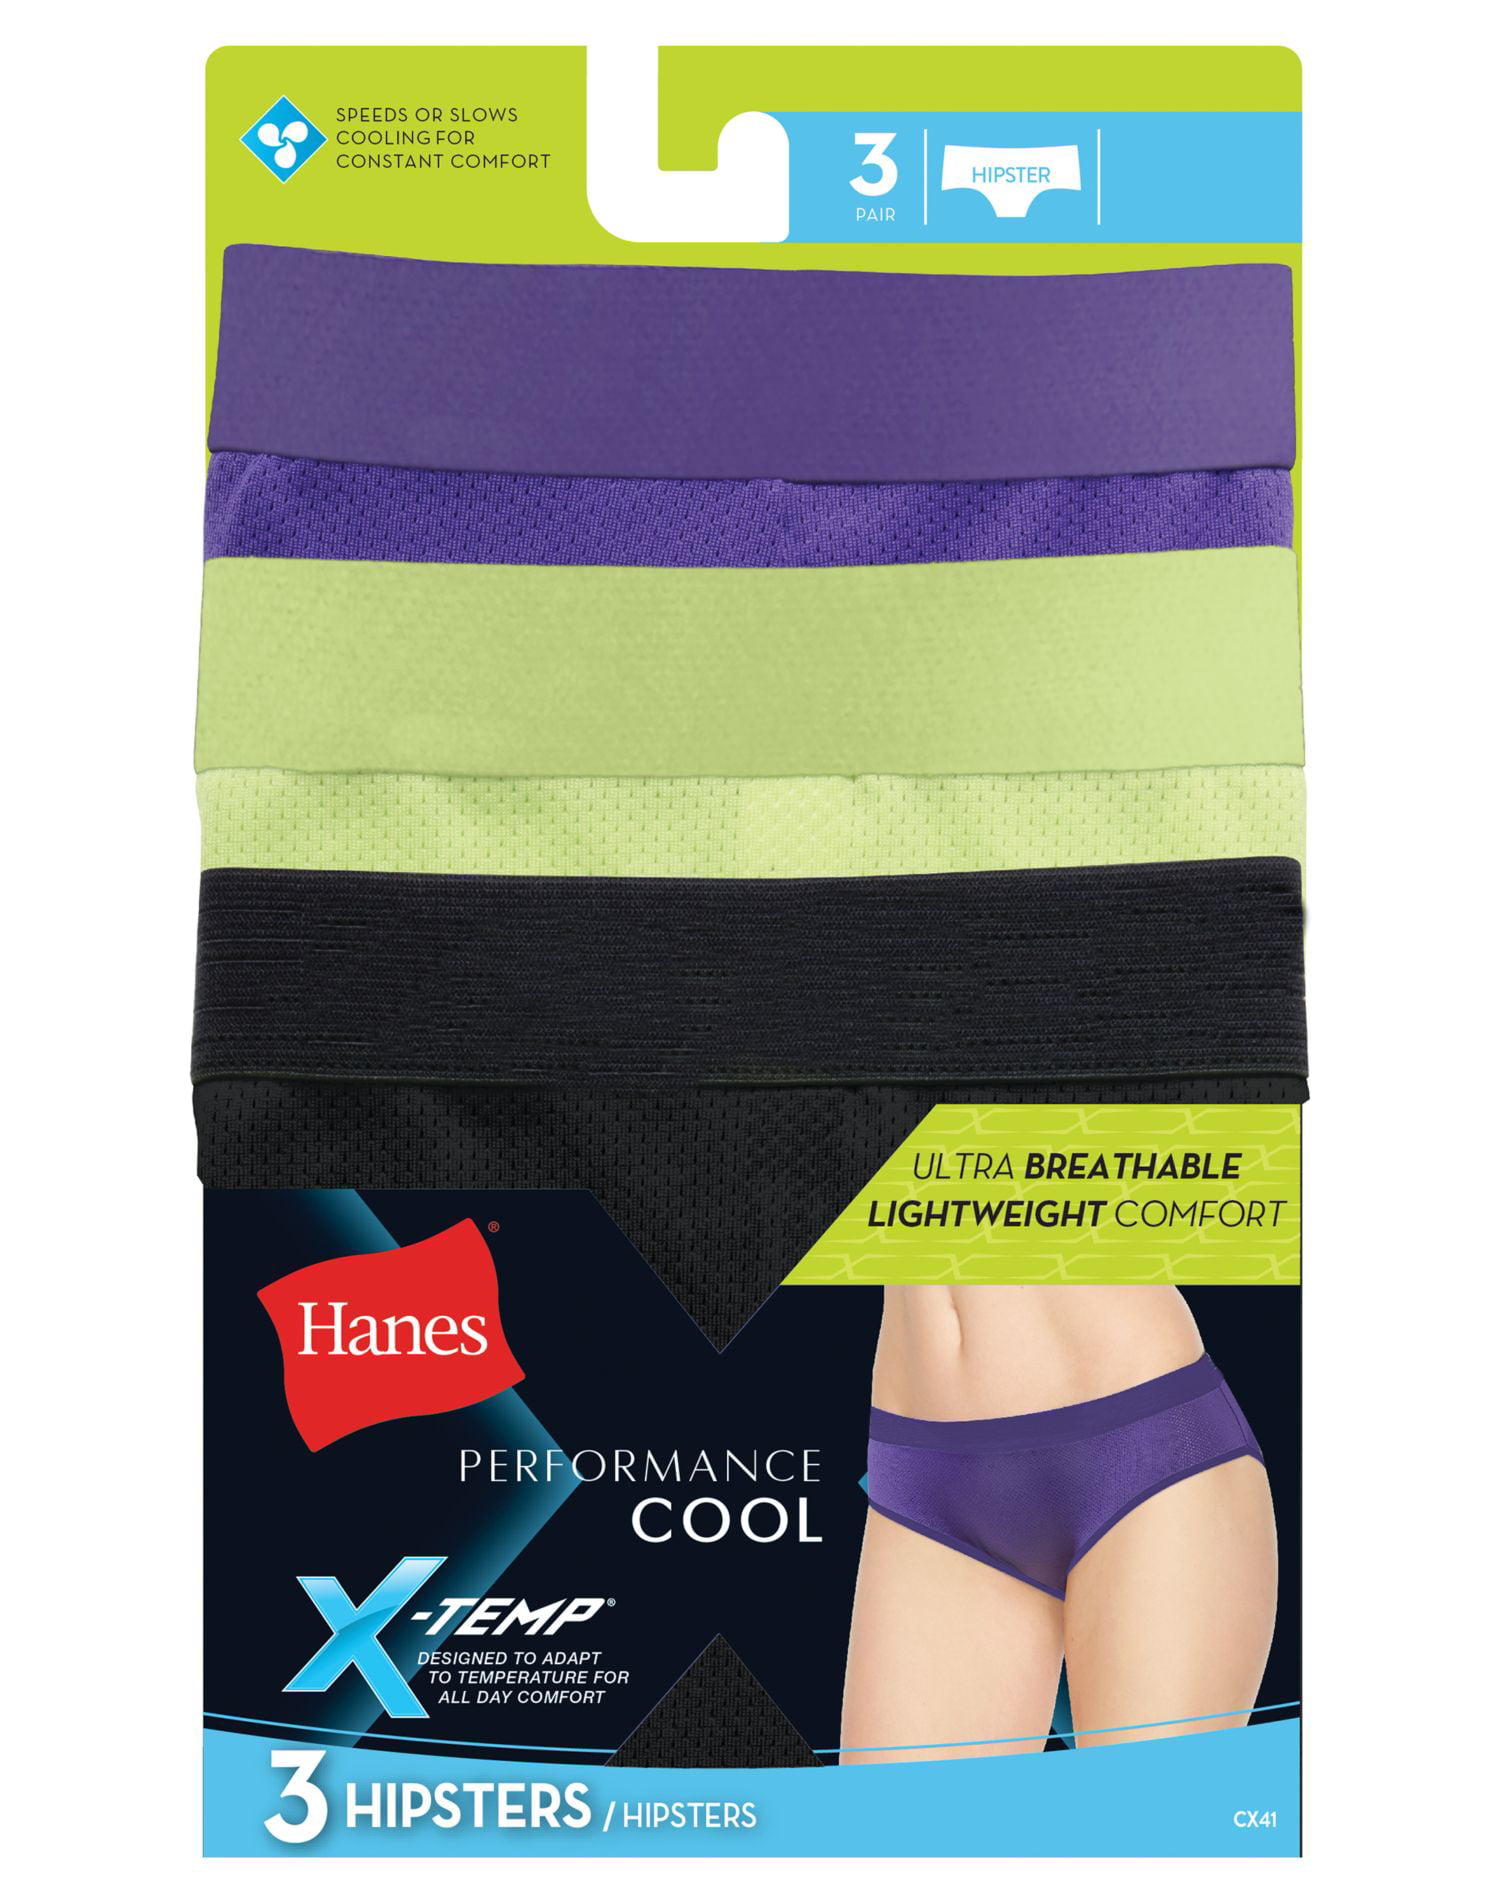 Performance Cool X-Temp Hipster P3 